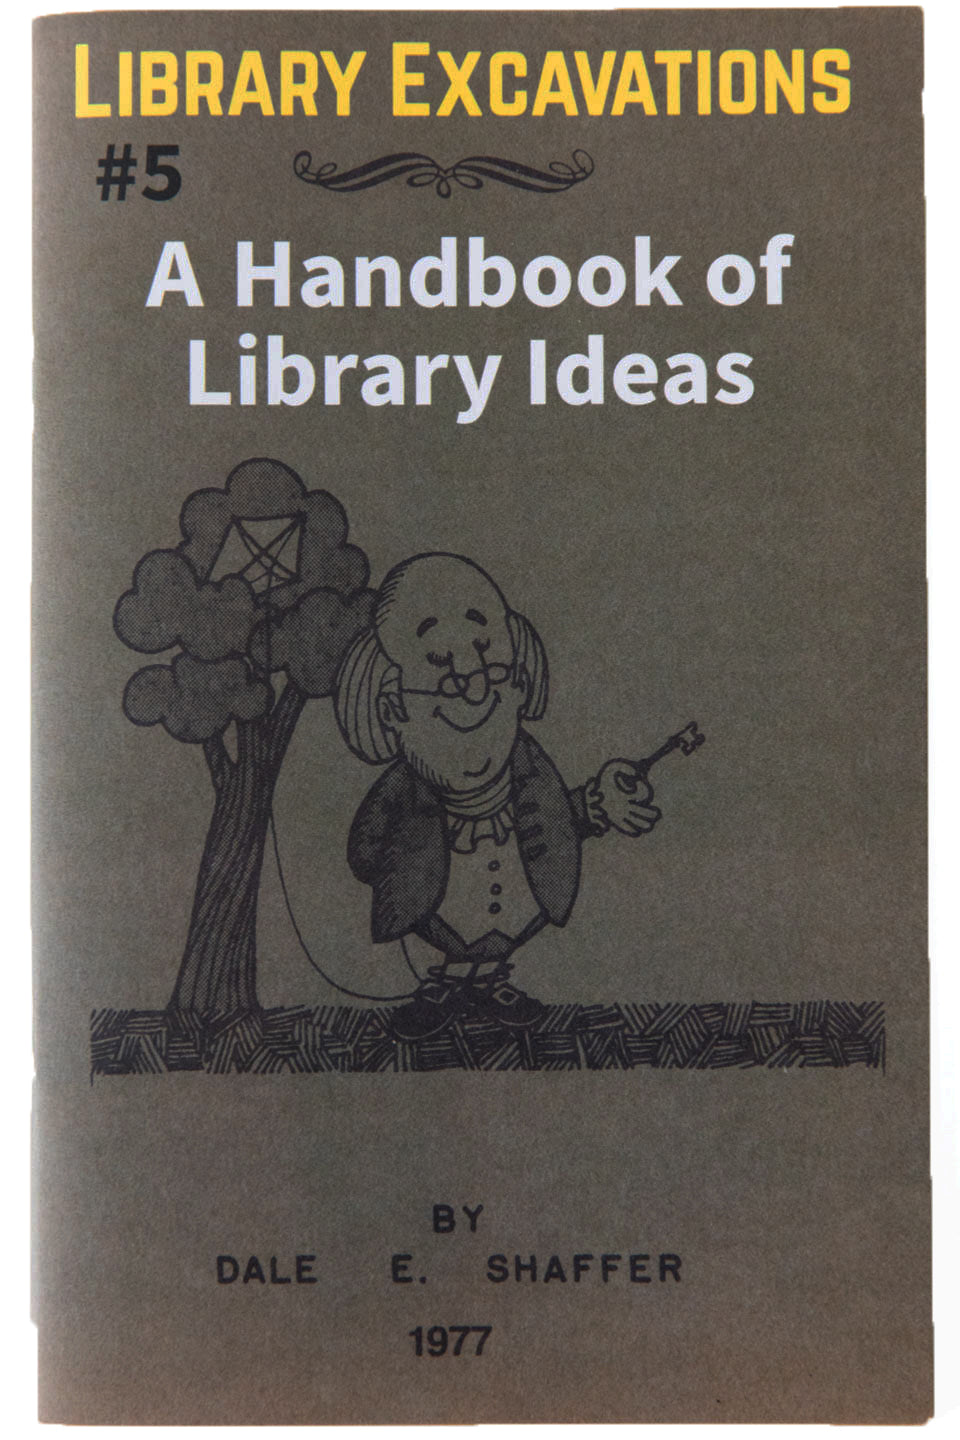 LIBRARY EXCAVATIONS #5 | A Handbook of Library Ideas